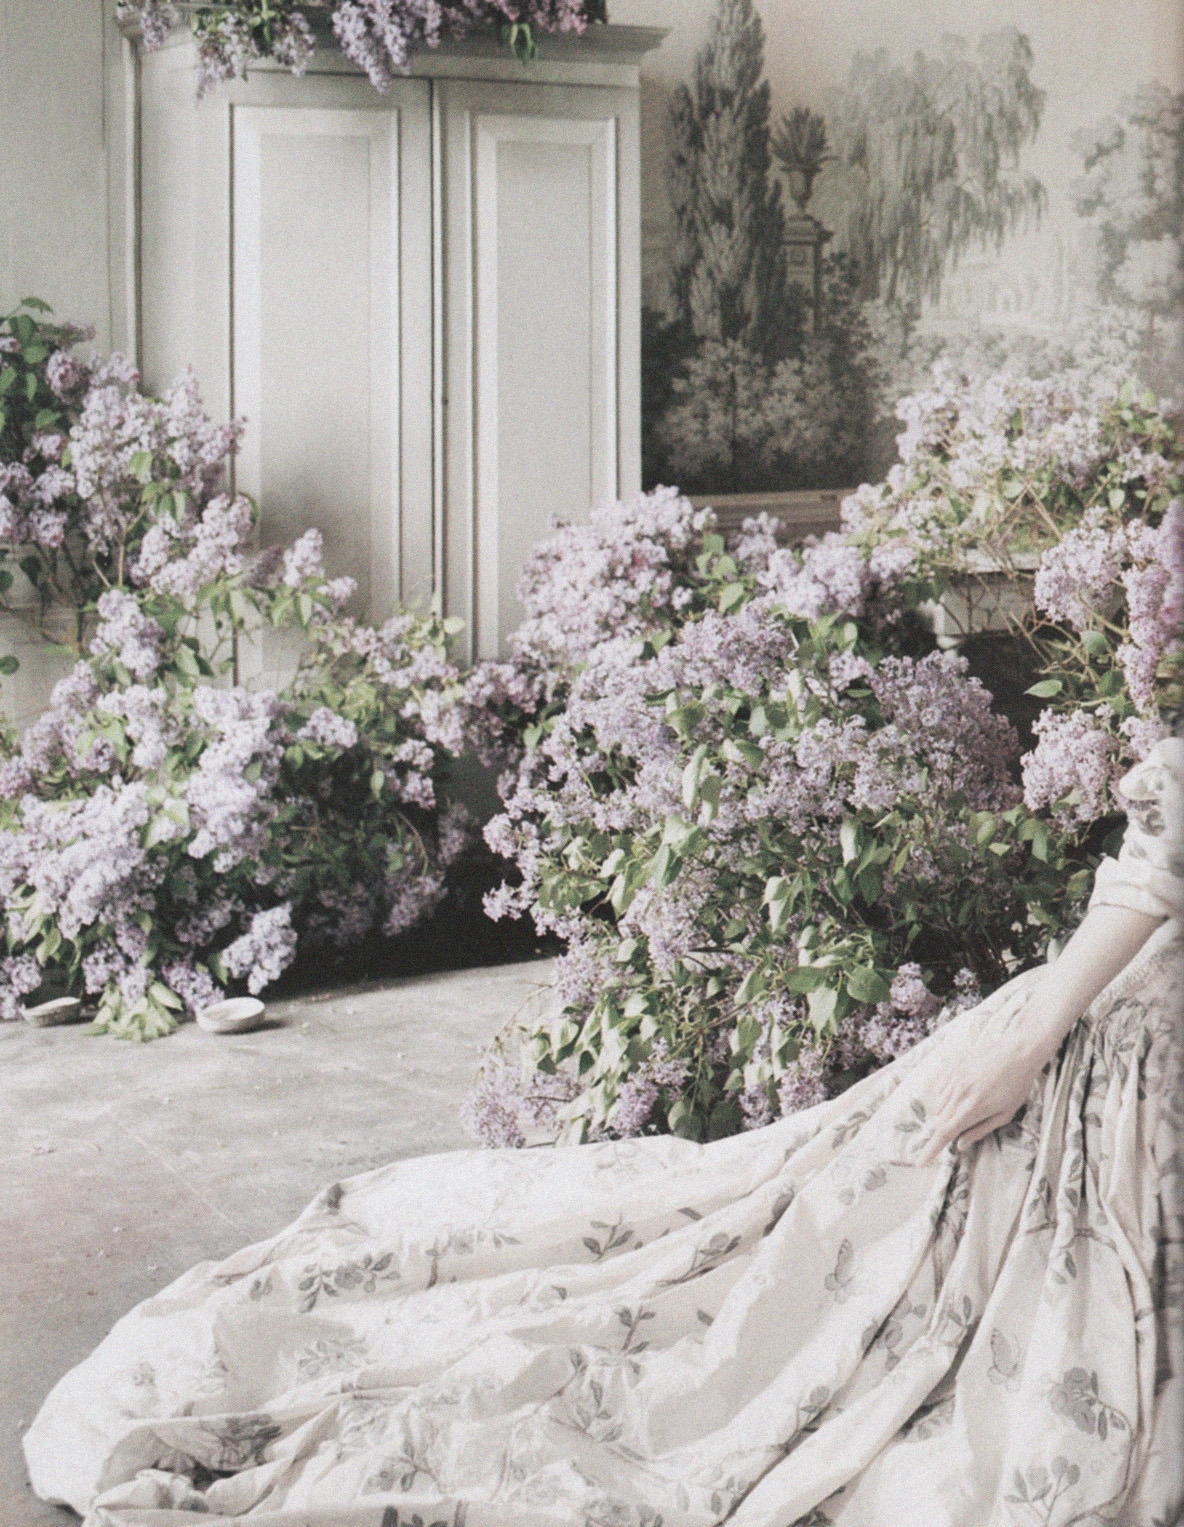 rosettes:  Among the freshly gathered lilacs, Guinevere wears Alexander McQueen’s